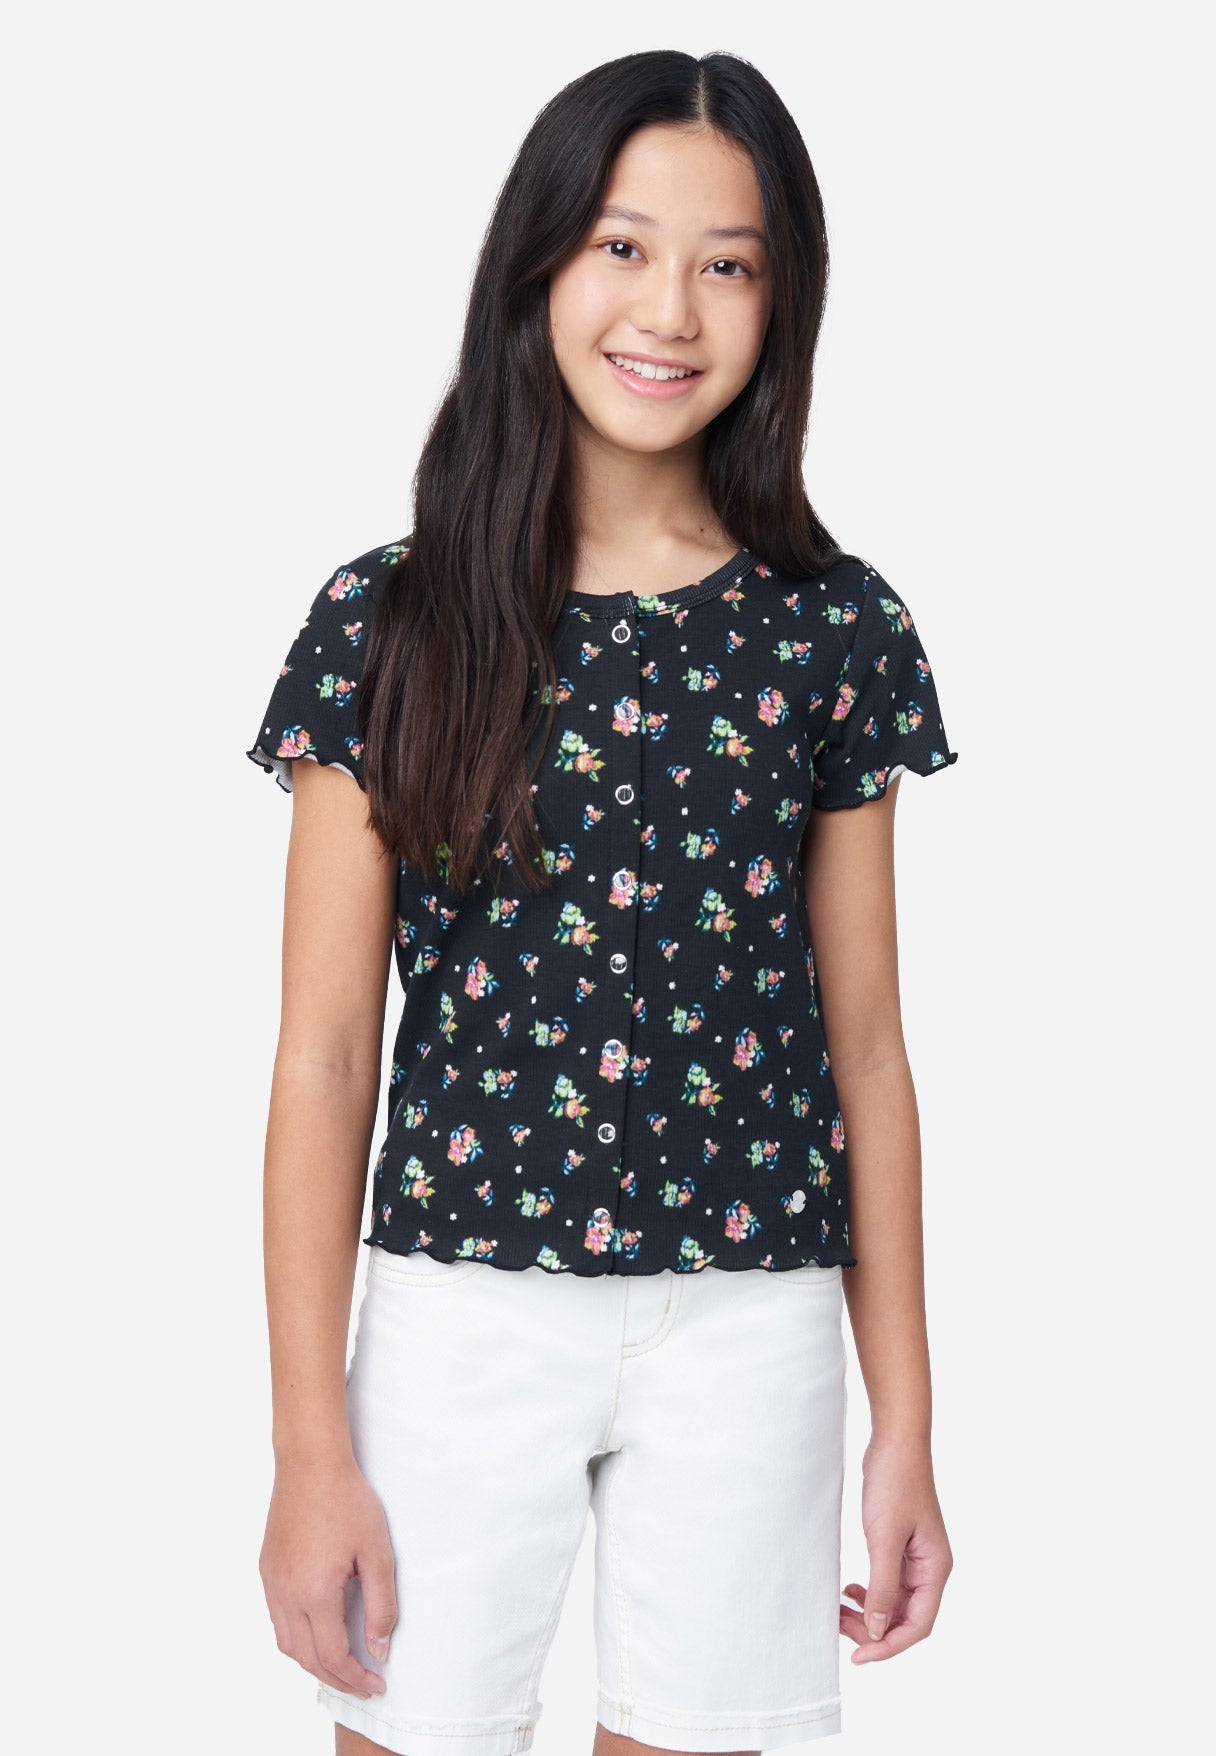 Justice Patterned Button-Up Girl's Tee in Black Floral, Size Medium (10)